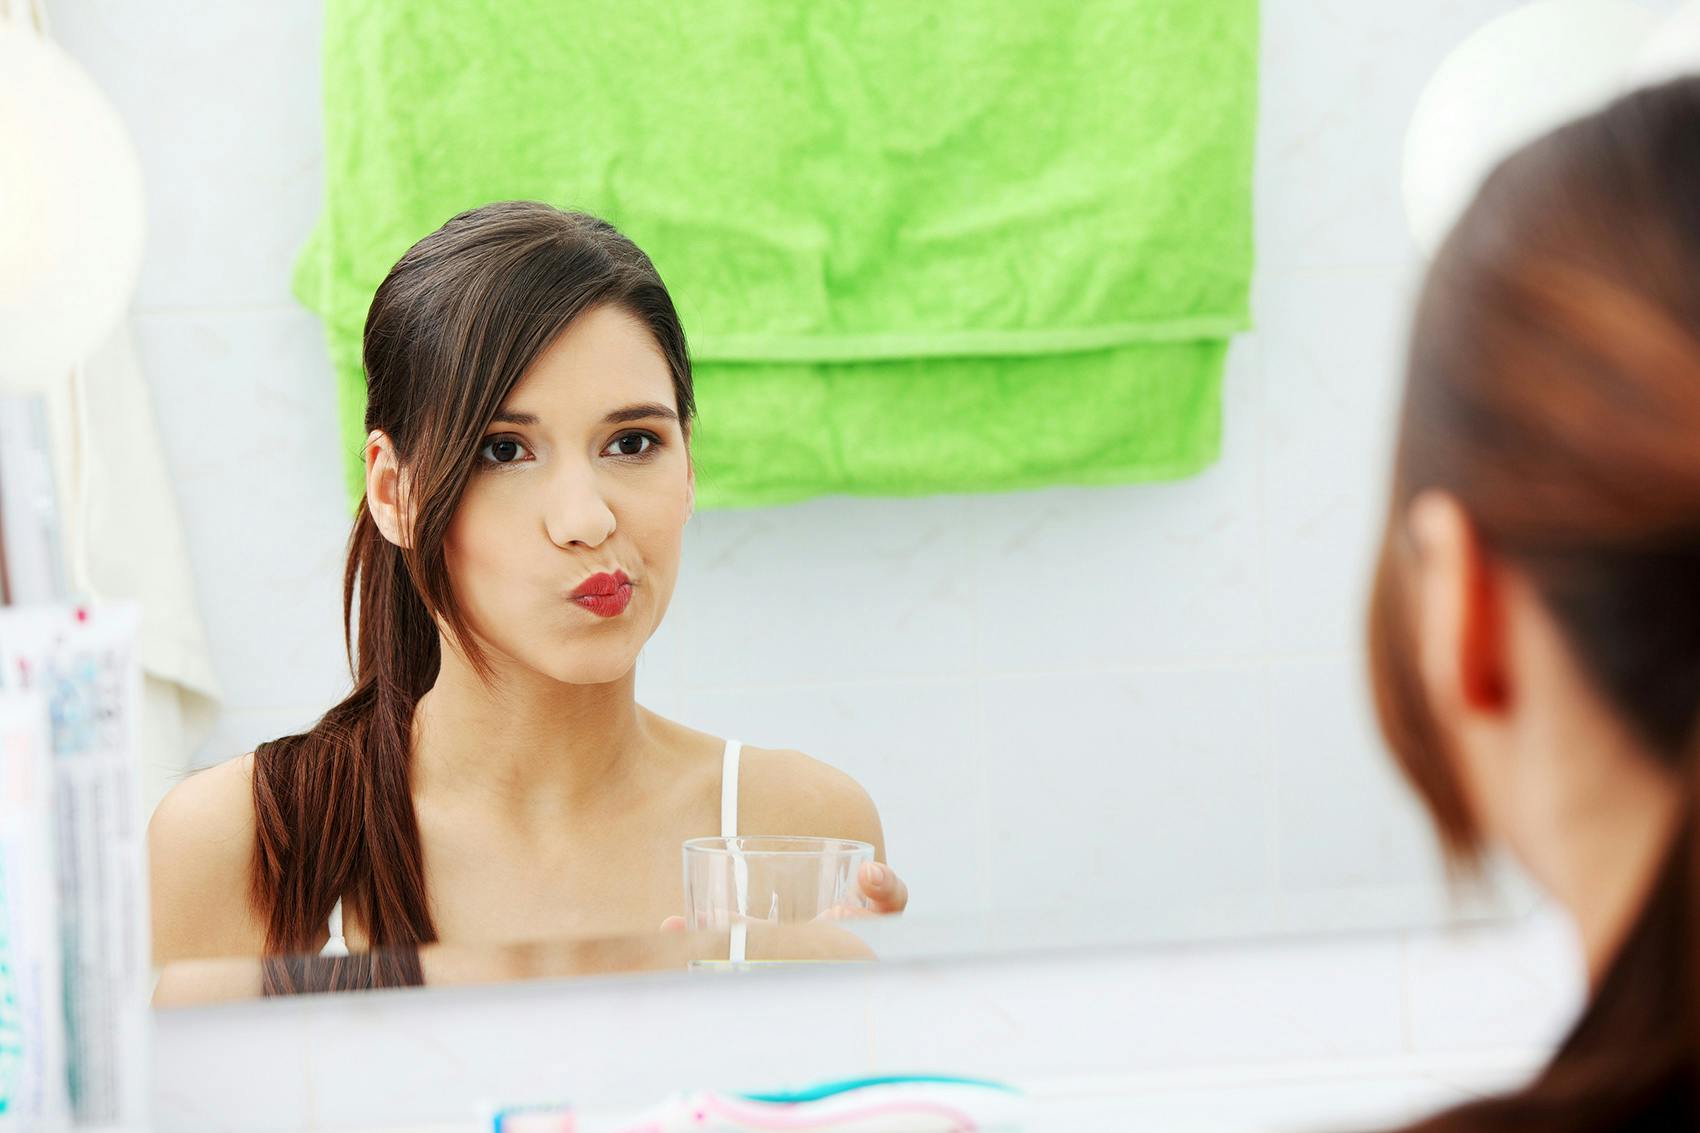 Young woman rinsing with mouthwash